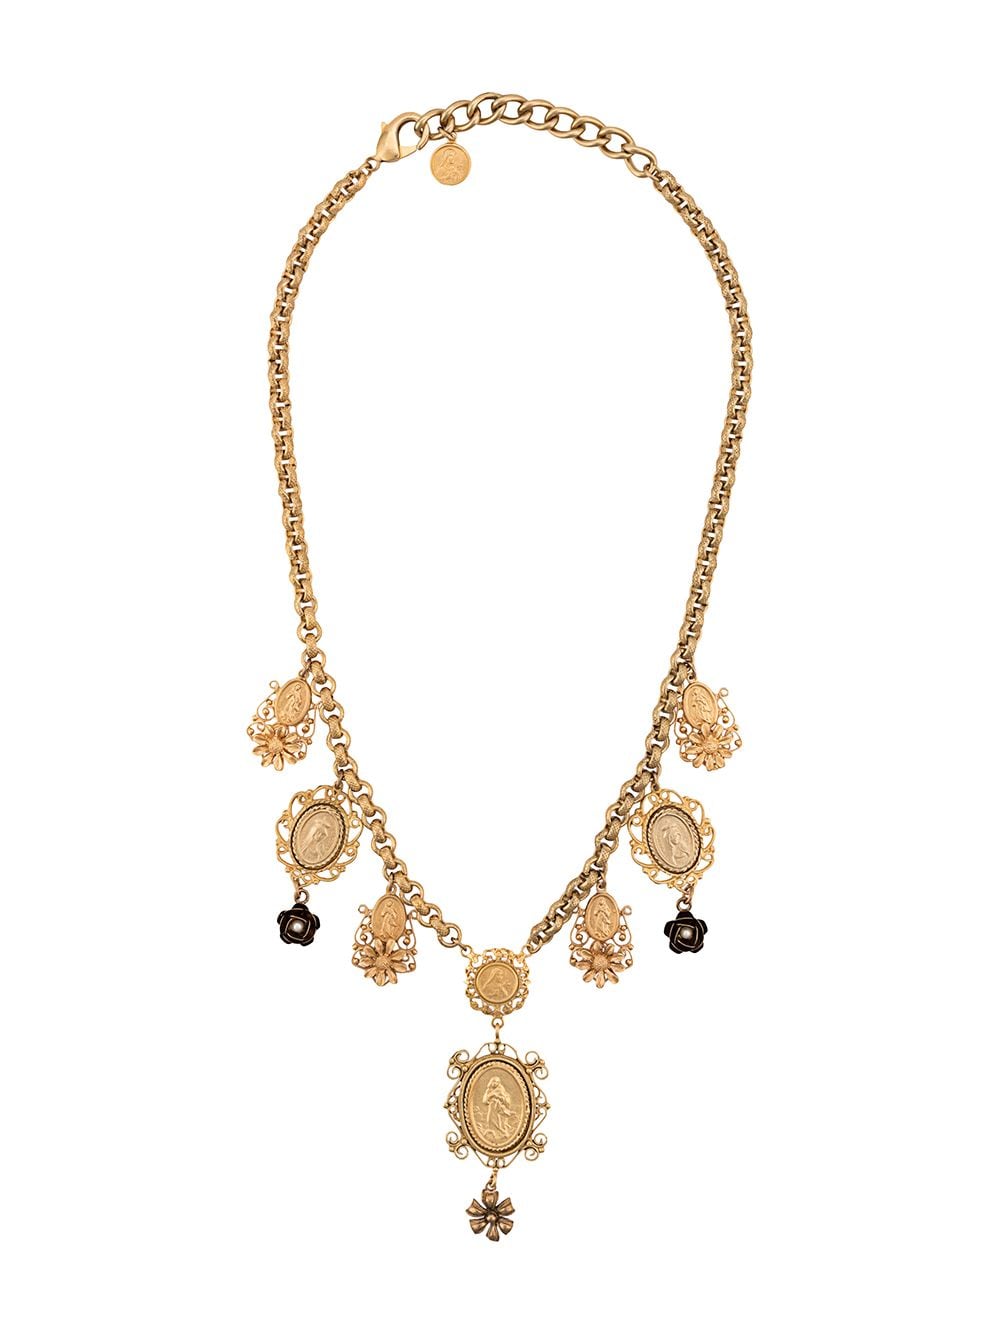 DOLCE & GABBANA NECKLACE WITH PENDANTS